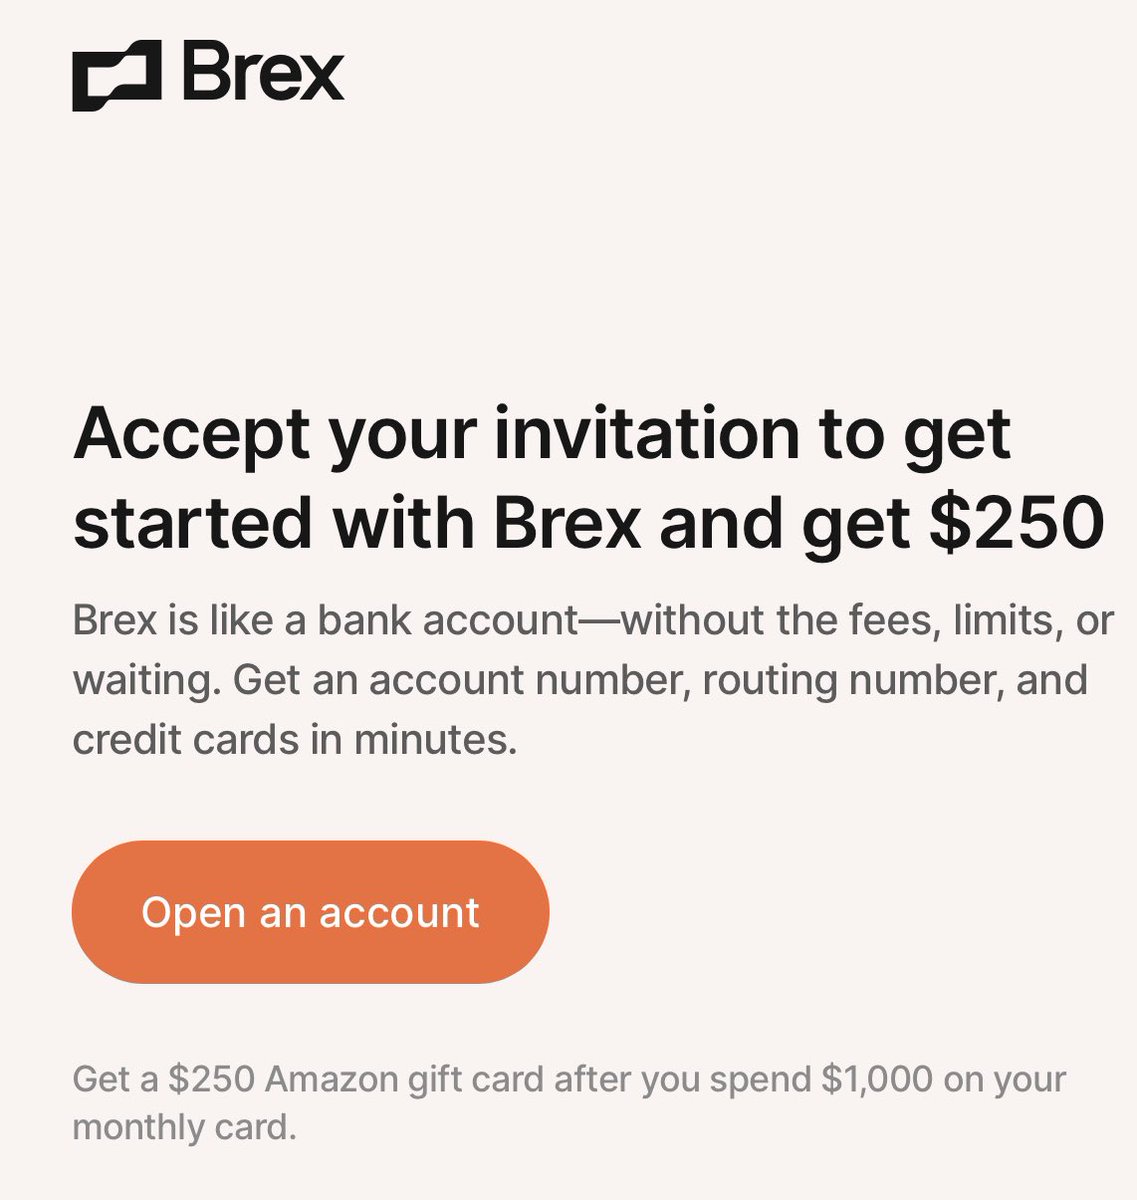 Brex is like a bank account—without the fees, limits, or waiting. Get a $250 Amazon gift card after you spend $1,000 on your monthly card. bit.ly/3kxoOy6.  #BusinessChecking #BusinessBanking #Business #Checking  #Brex #Bonus